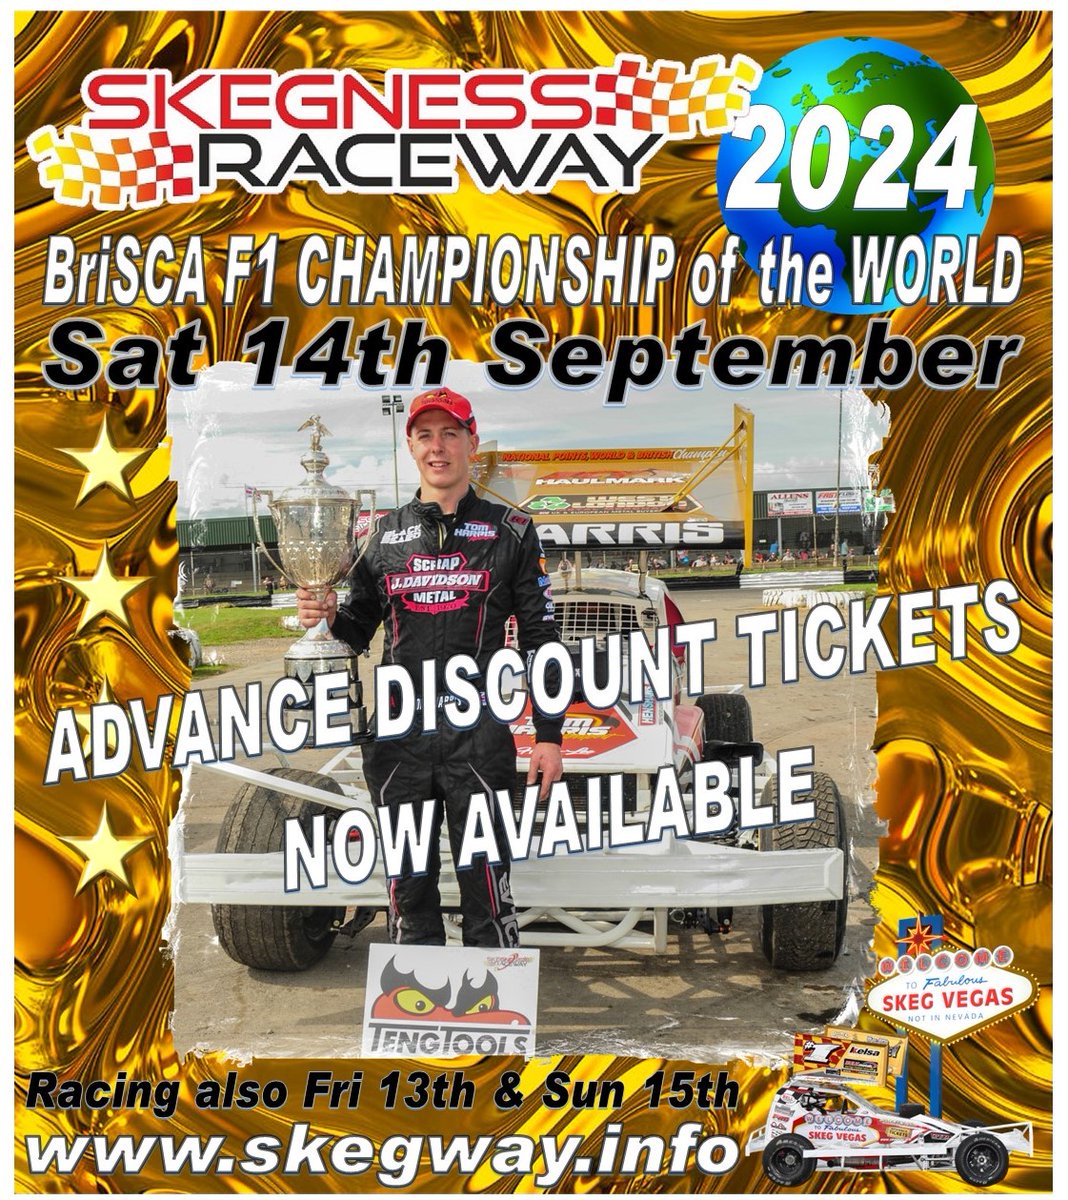 2024 BriSCA F1 World Weekend Advance Discount tickets available on skegway.info Please see News item on the website for current info New system, please read all the info before ordering. Full event guide also on the website Next is 5th & 6th May 1pm Kids Go Free